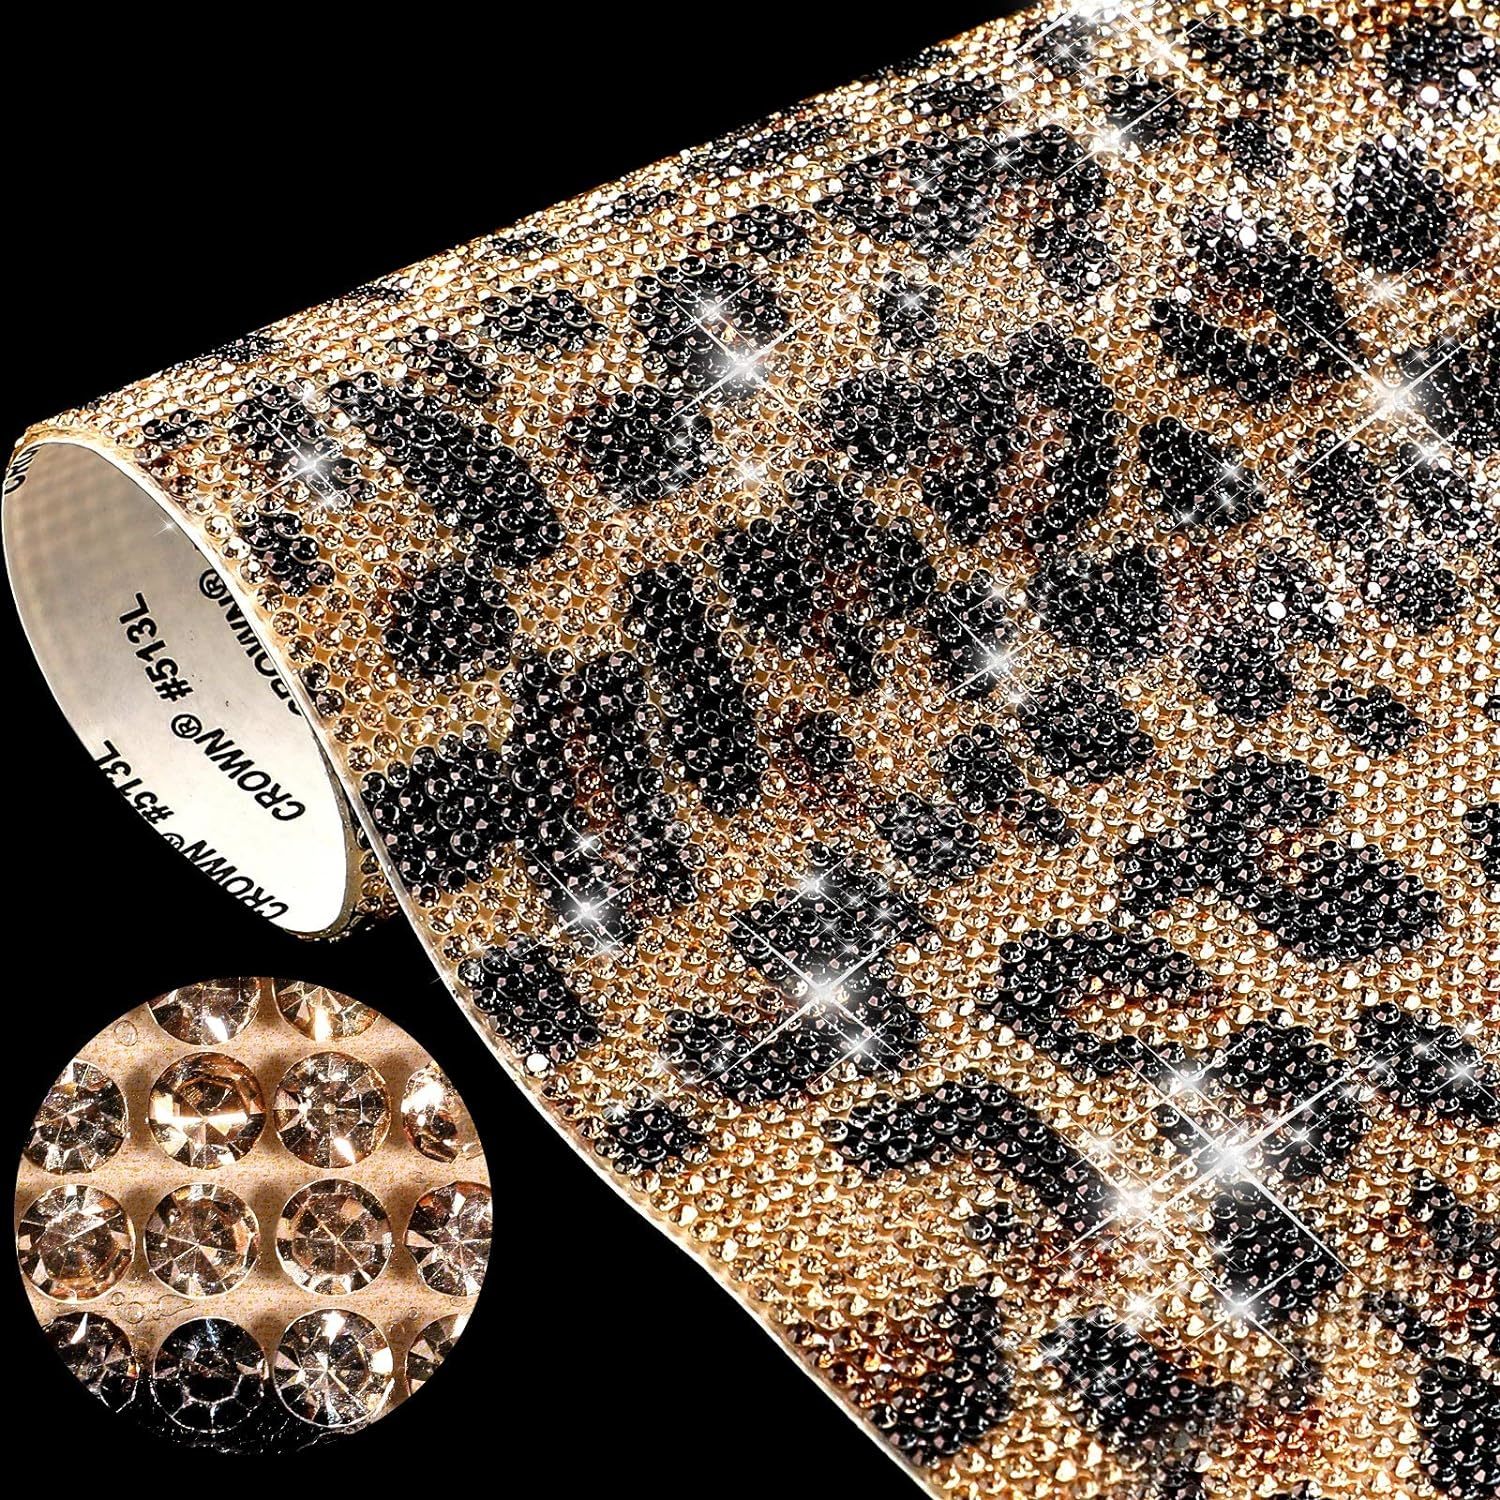 Primary image for 12000 Pieces Leopard Print Bling Rhinestone Sticker With 2 Mm Rhinestone Crystal